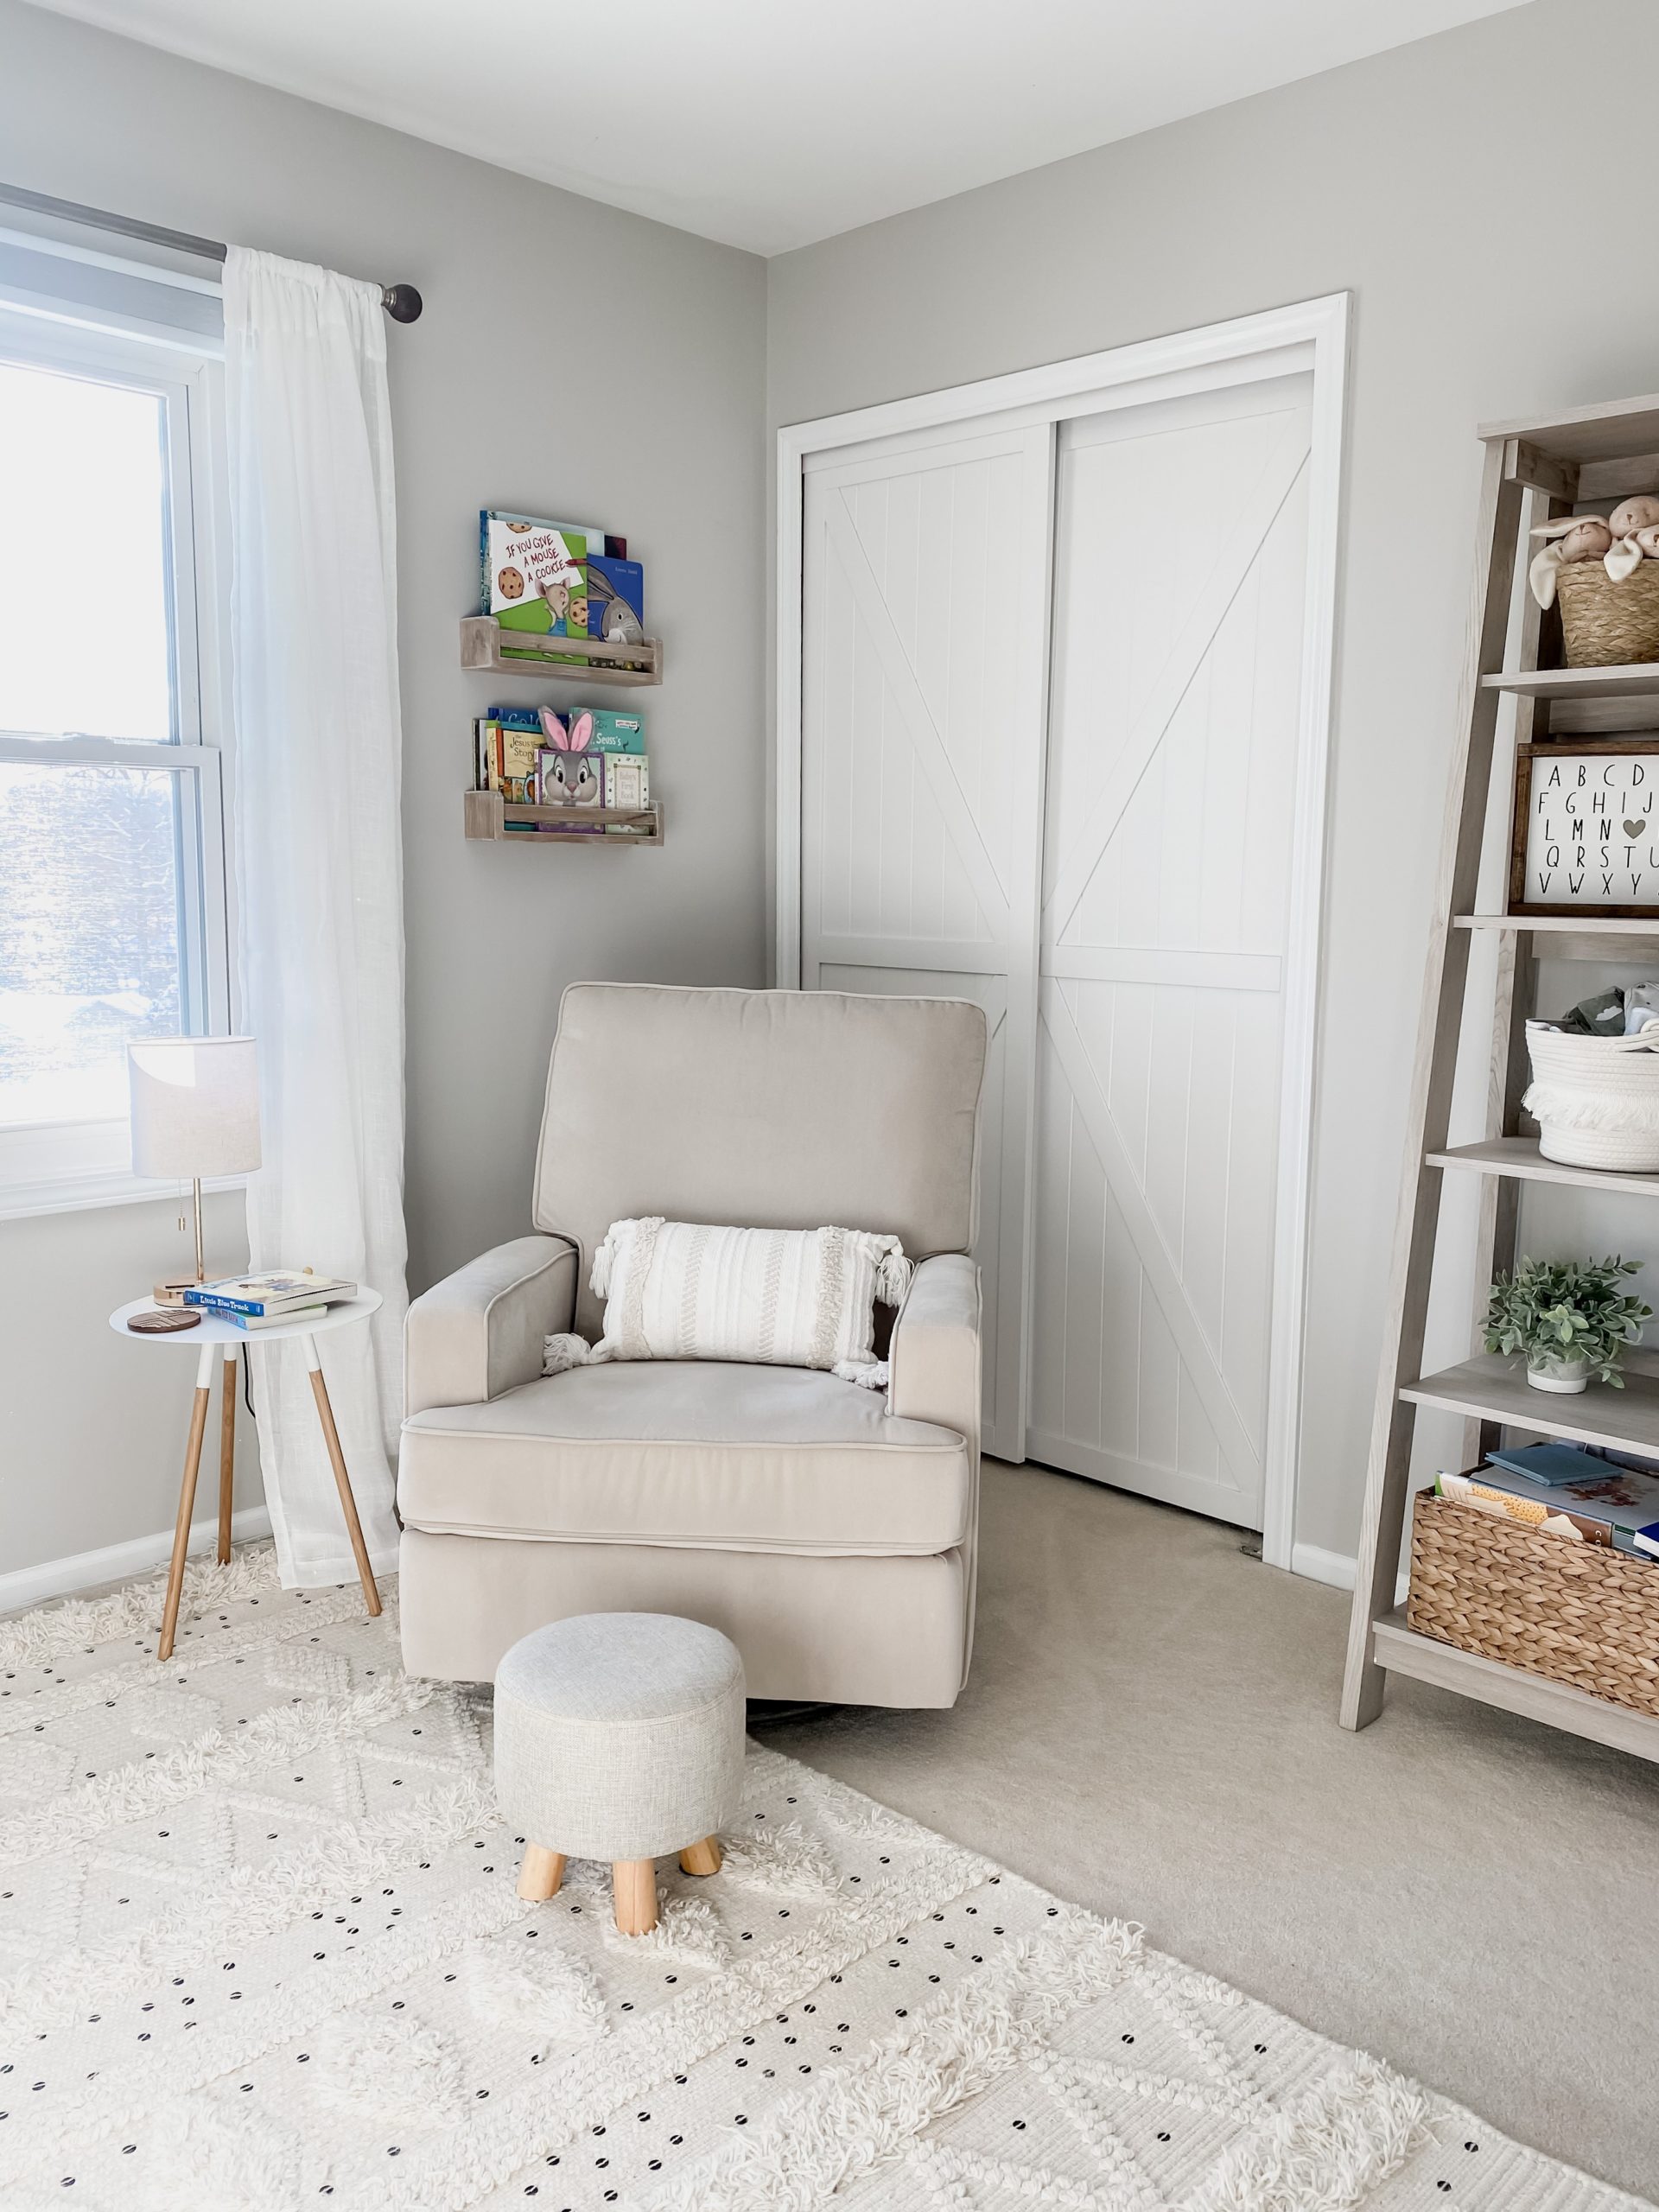 Nursery Corner by Amanda (@comestayawhile on Instagram) Using Our Trident Double K-Design White Bypass Closet Door